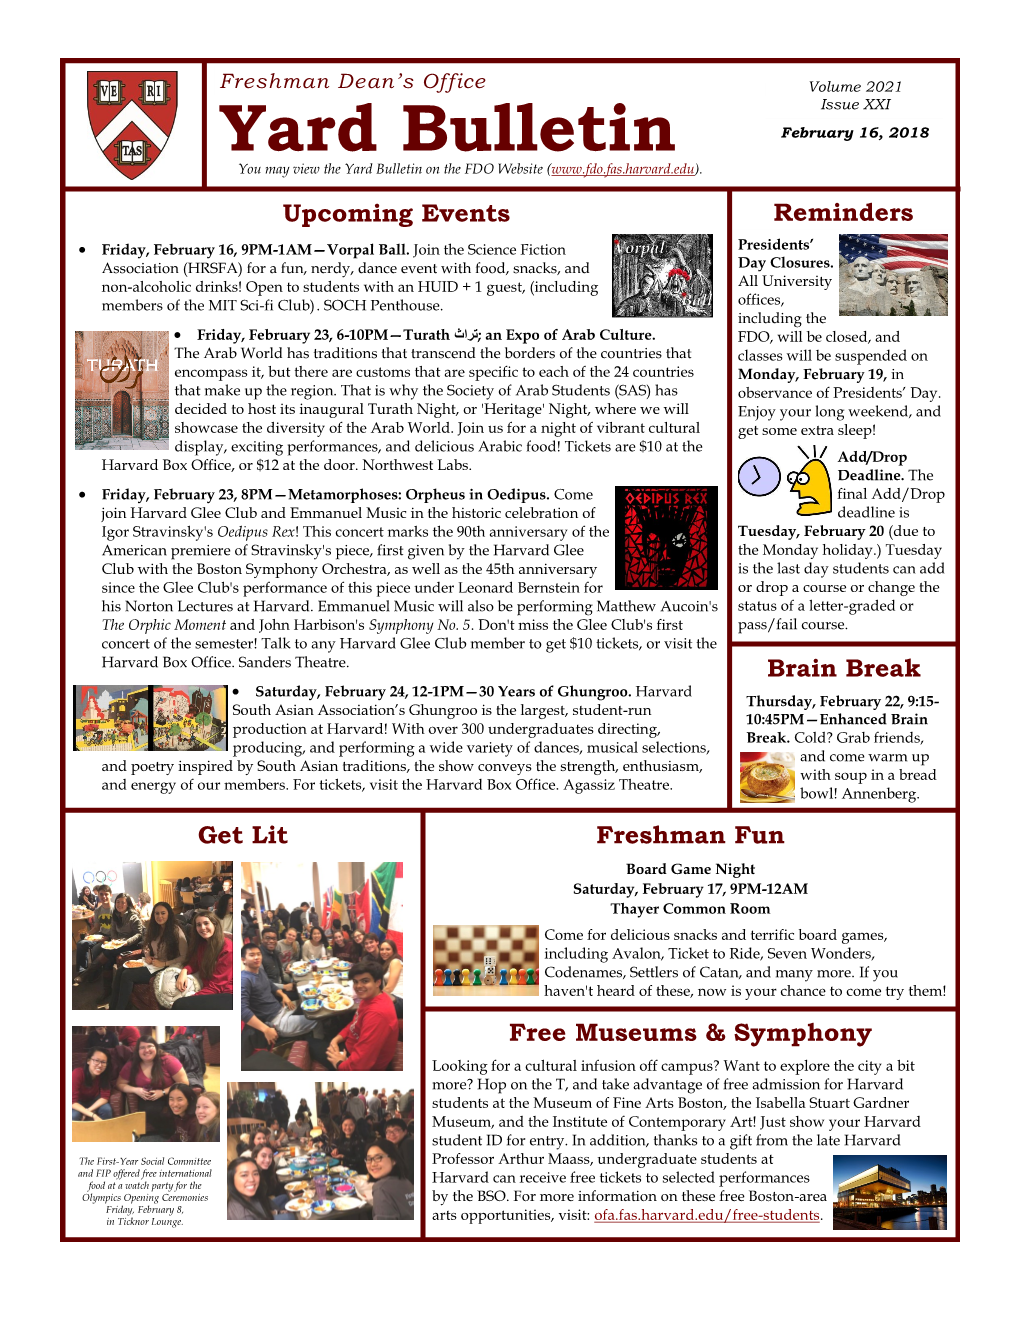 Yard Bulletin February 16, 2018 You May View the Yard Bulletin on the FDO Website (